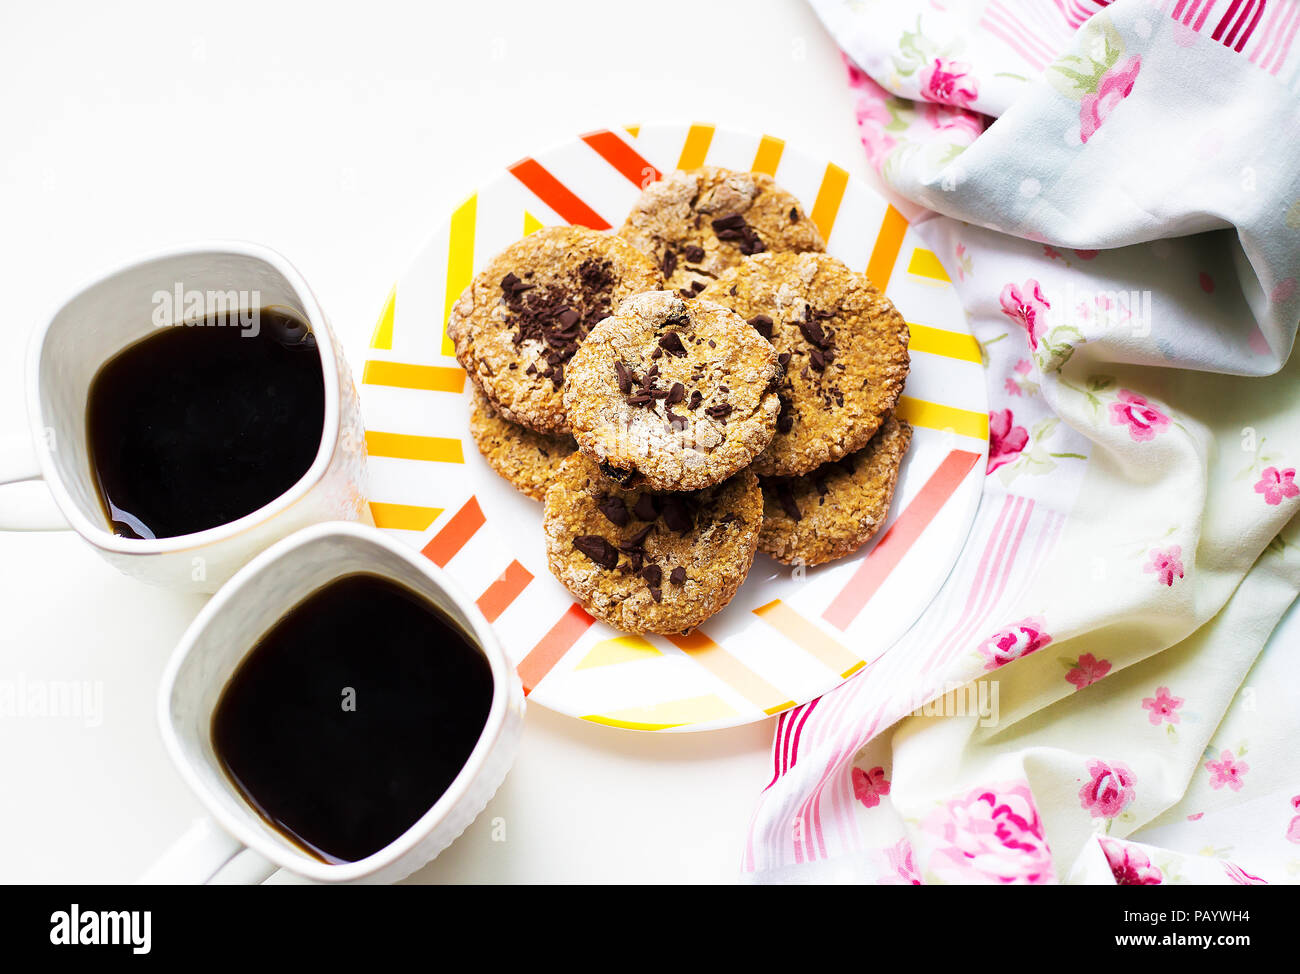 Oatmeal cookies with chocolate on a plate with bright cloth and two cups of coffee Stock Photo